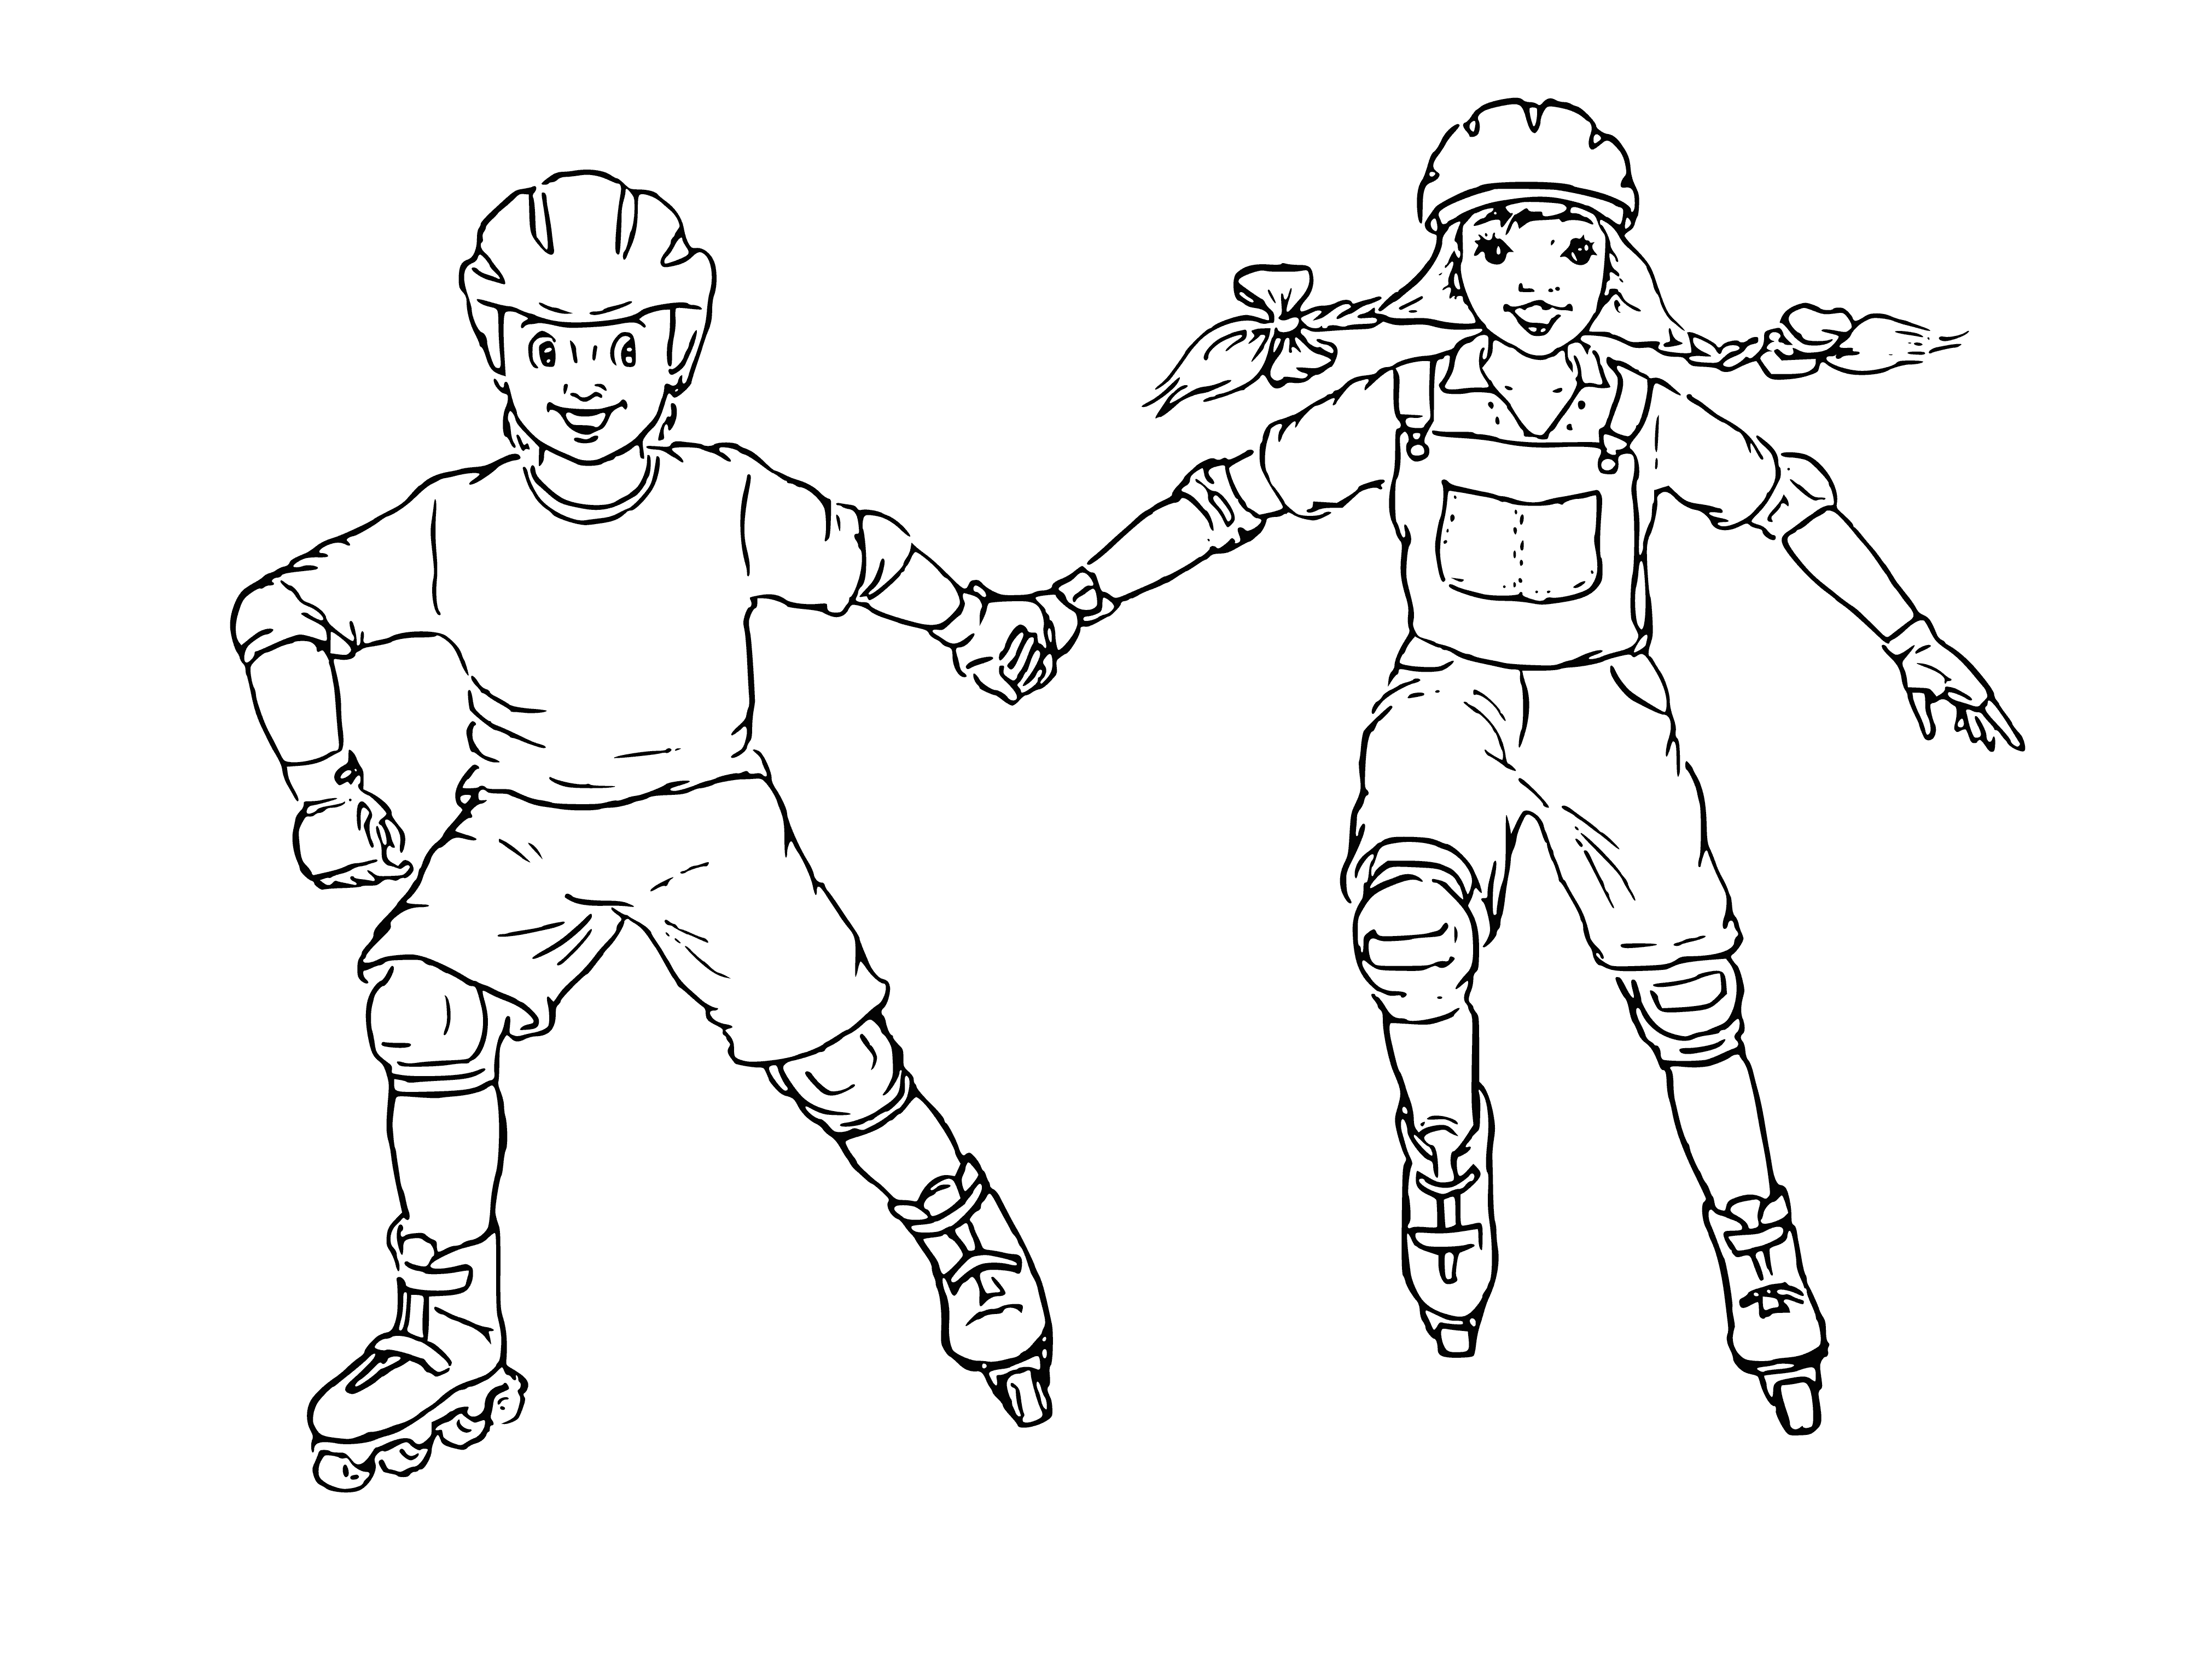 coloring page: Children are dancing around on roller skates in a park, some holding hands and all smiling. #fun